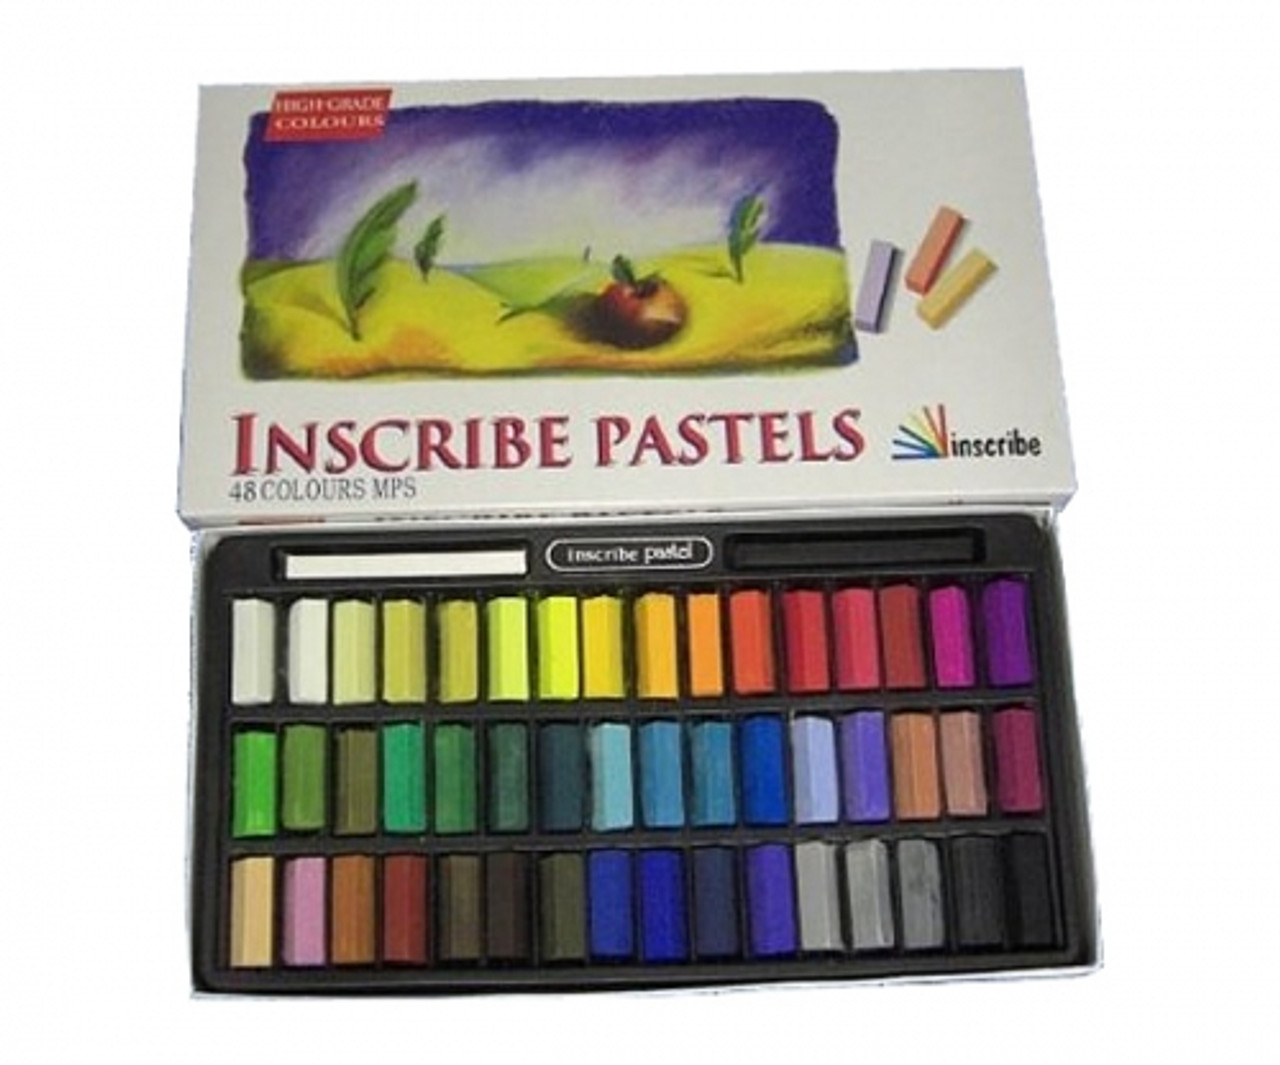 Mungyo Inscribe Soft Colour Pastel Half Size Sets of 24, 32, 48 or 64 